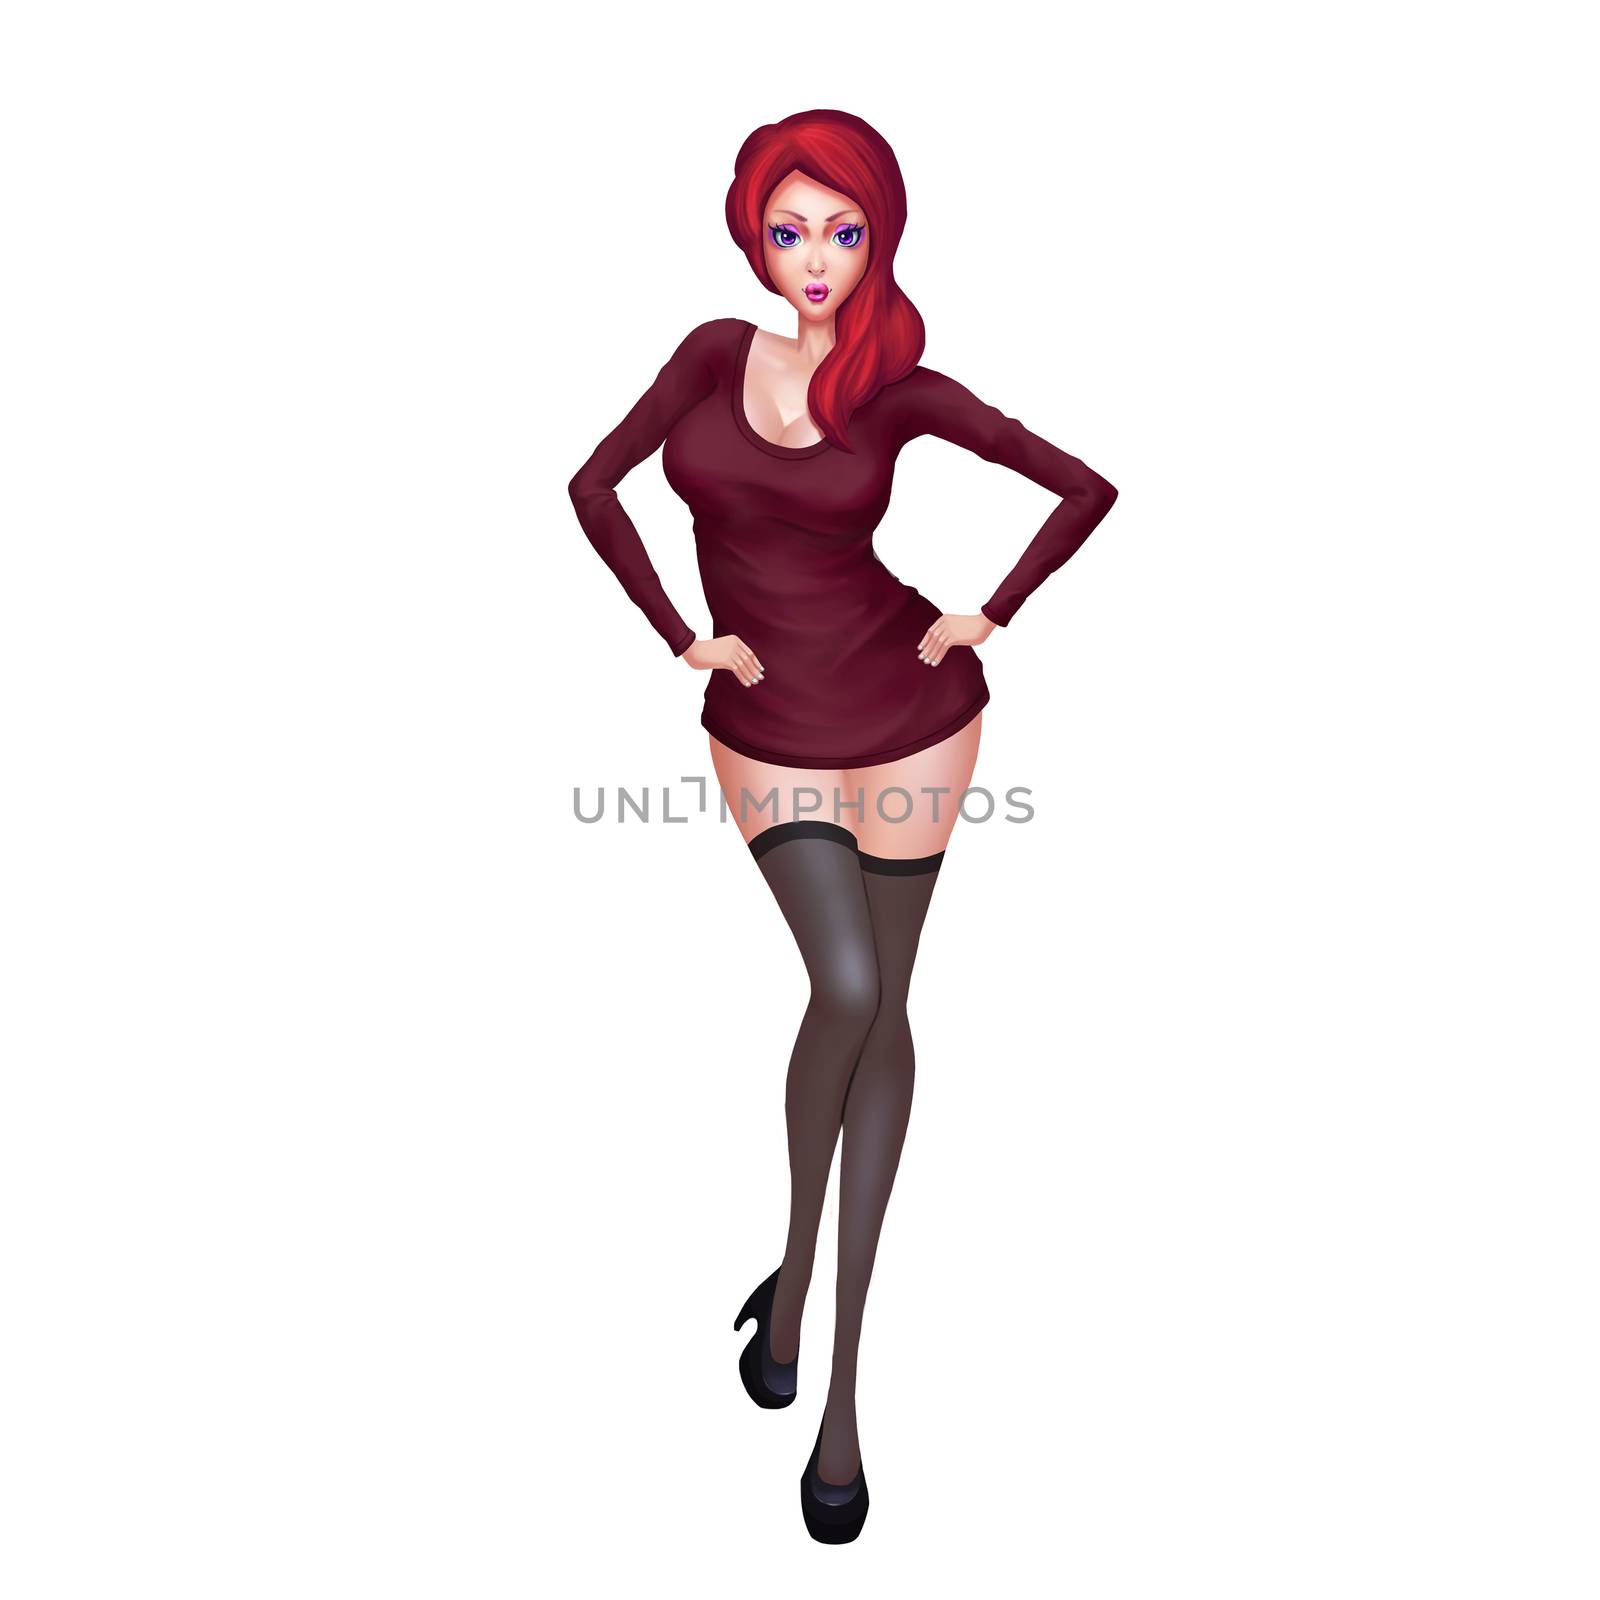 High Definition Illustration: Seductive Woman with Fewer and Fewer Clothes Series 2. Realistic Cartoon Style Character Design.